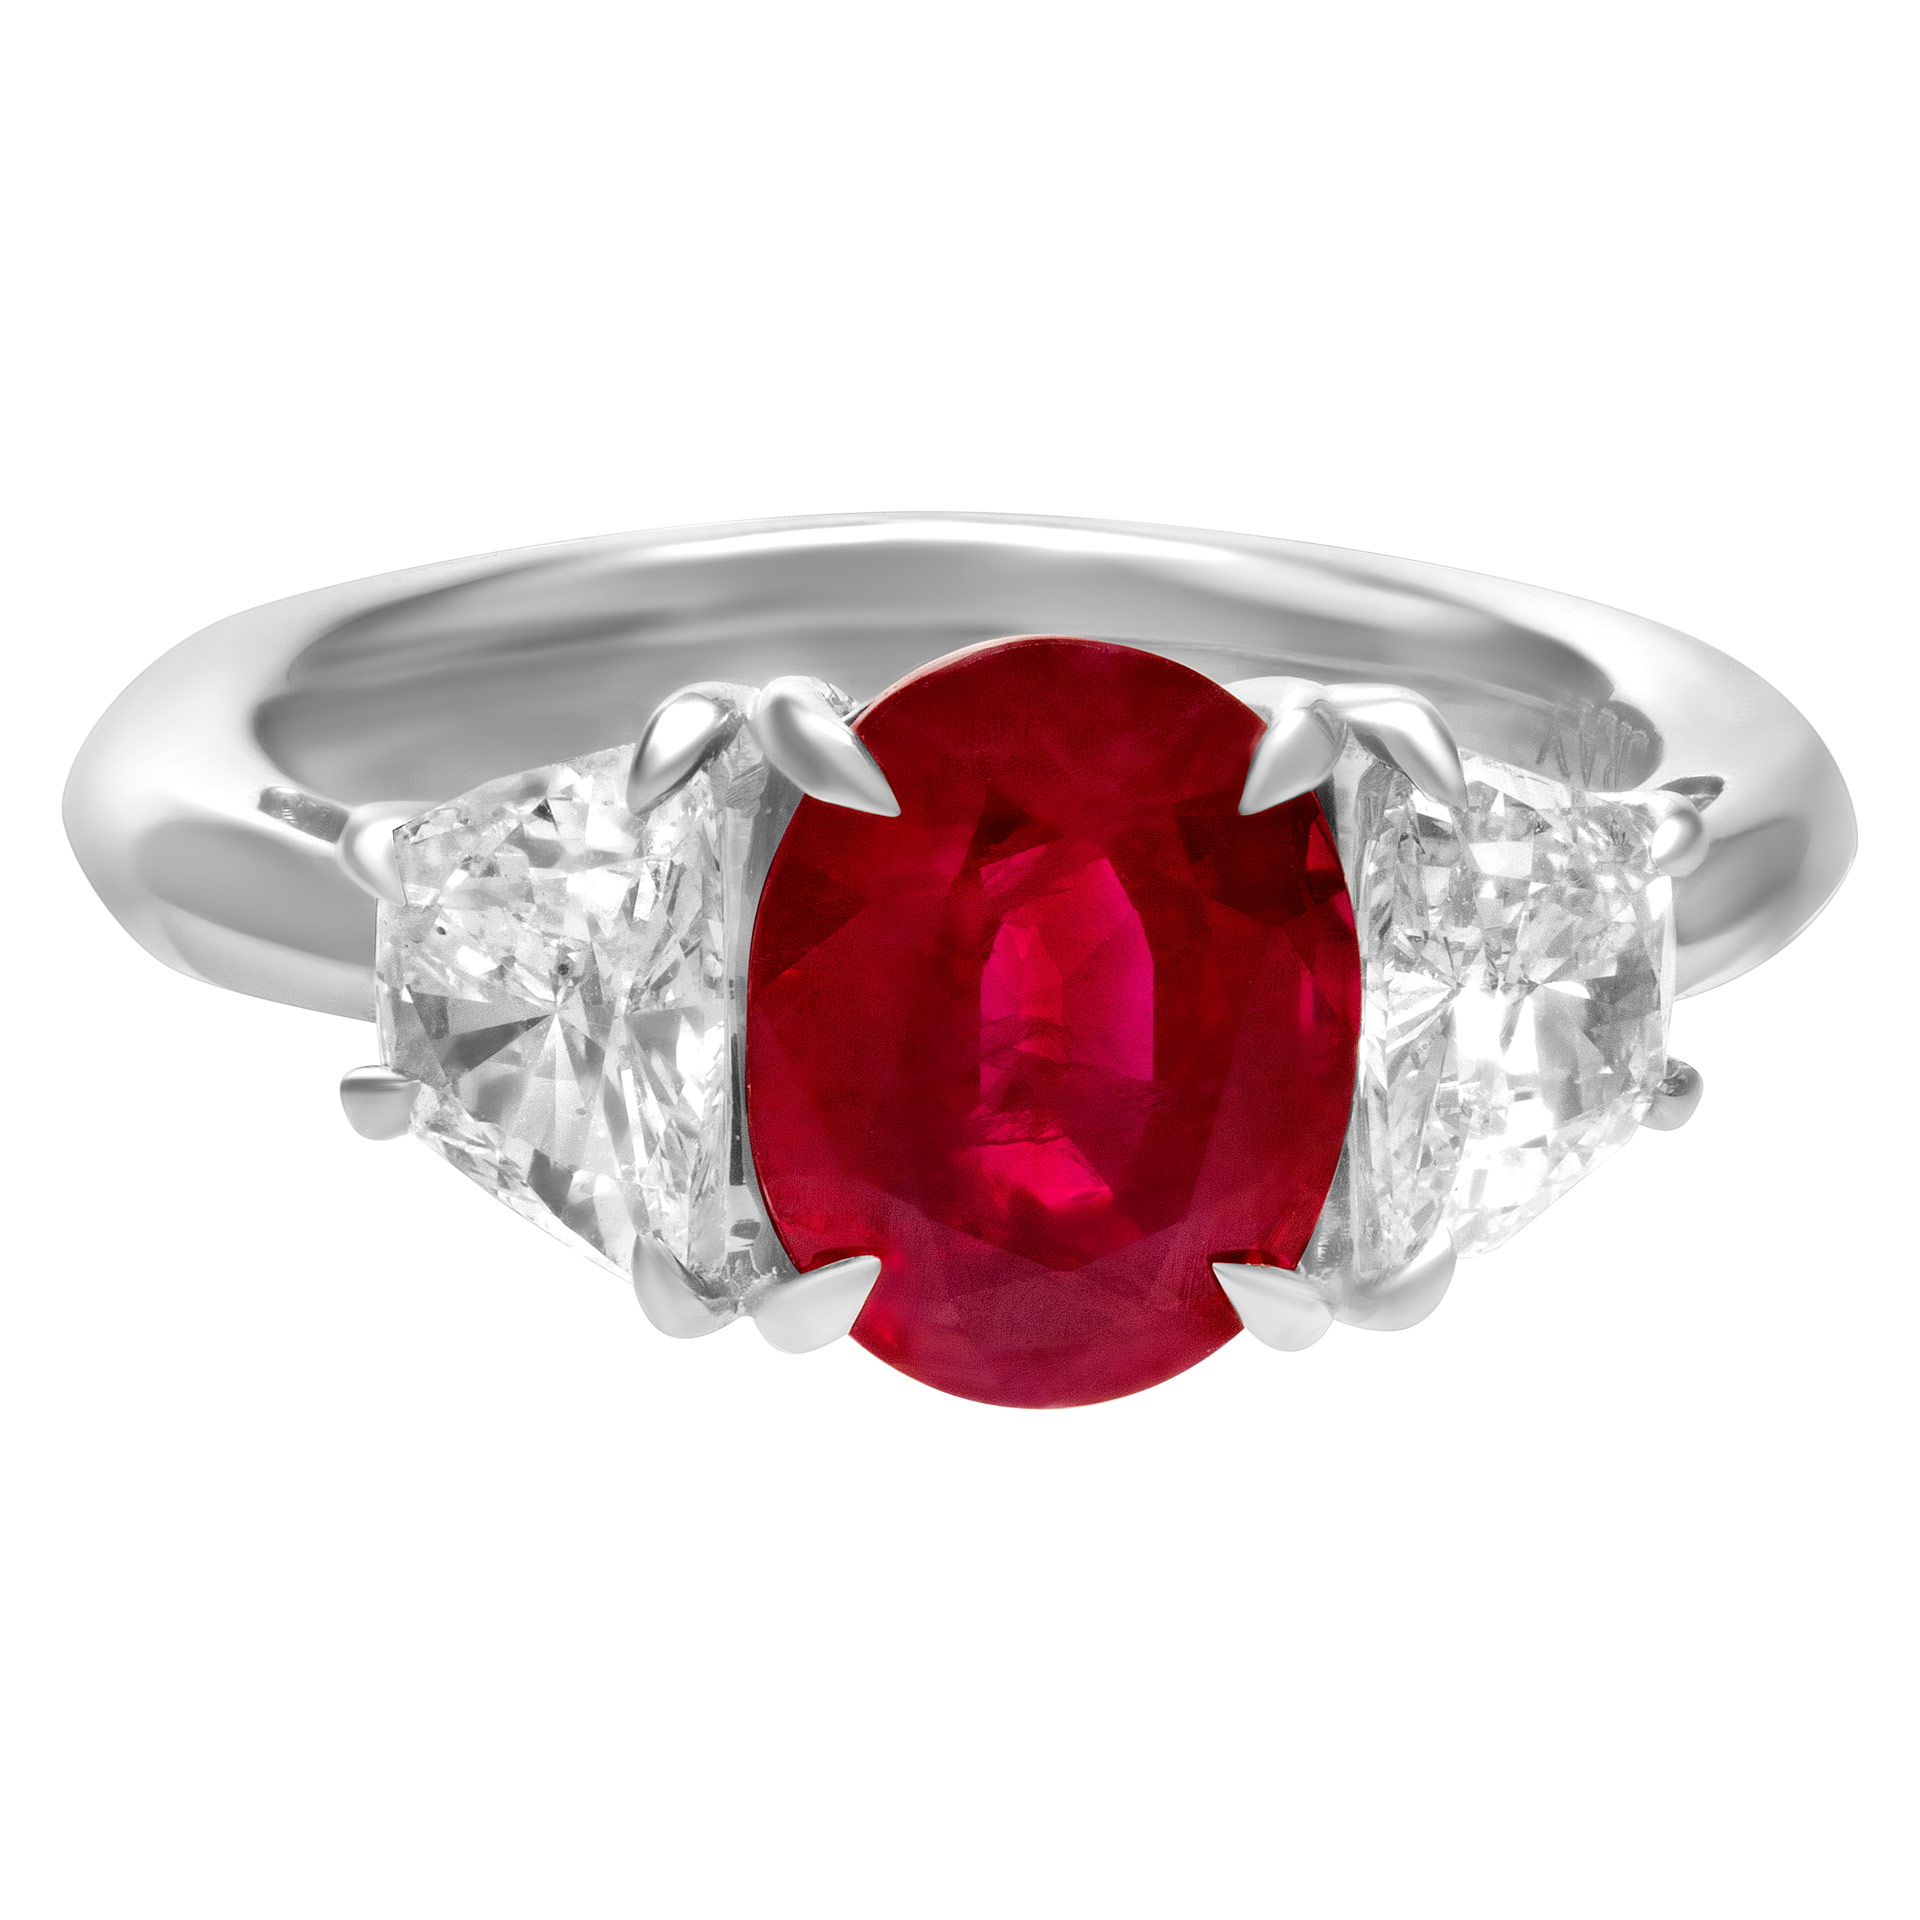 AGL certified Burma ruby 3.02 ct ring in platinum with 1.12 cts in side diamonds